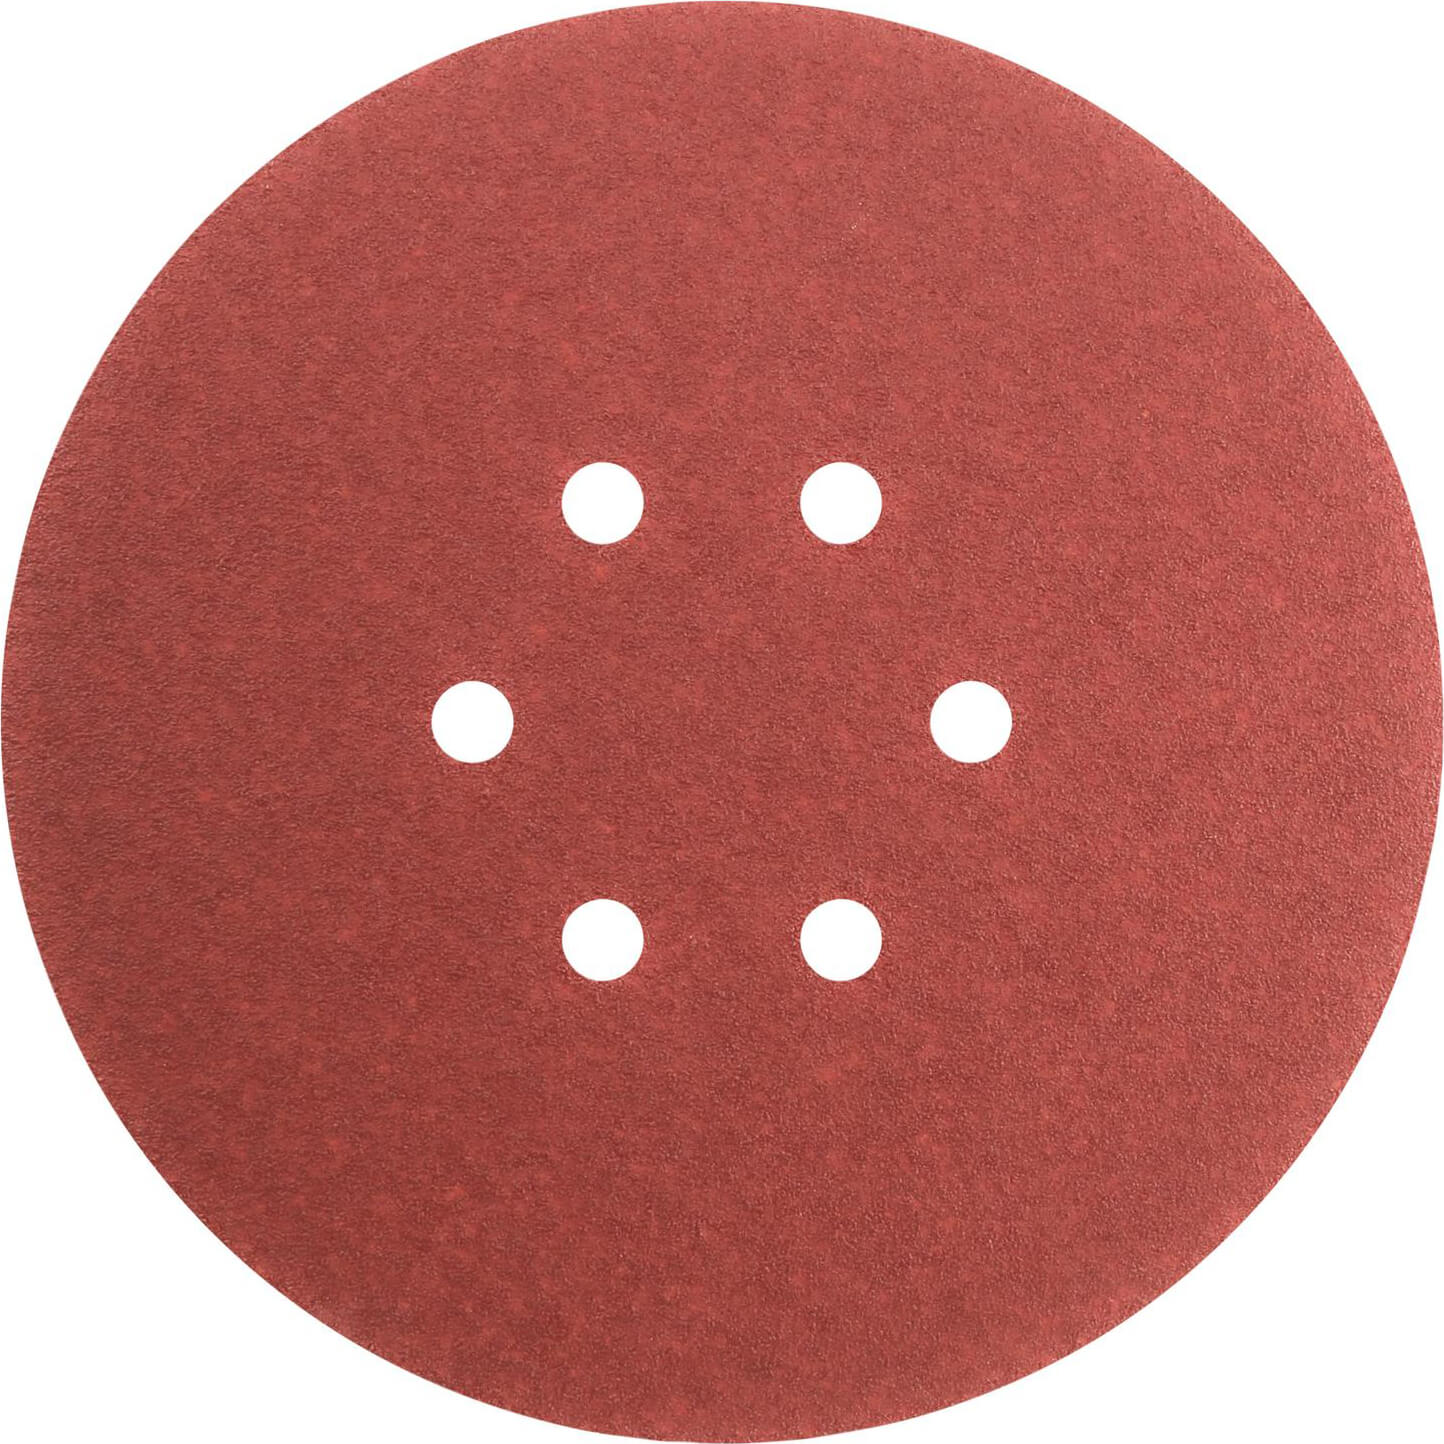 Image of Faithfull 150mm Perforated Sanding Disc 150mm Very Fine Pack of 5